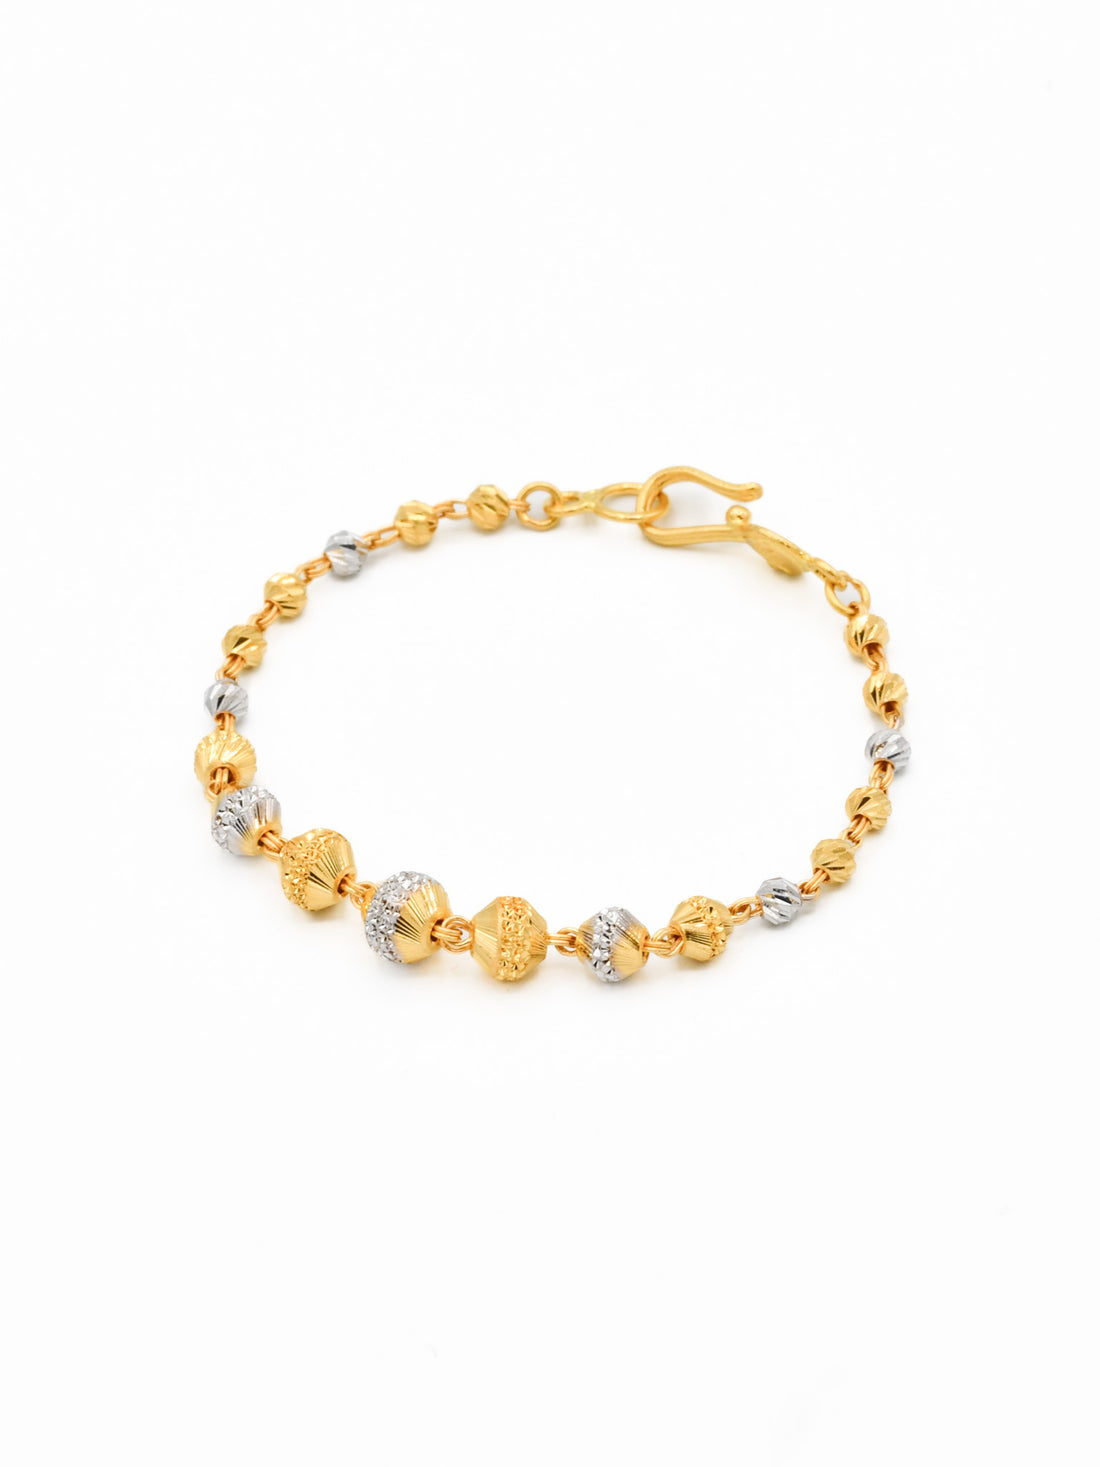 22ct Gold Two Tone Ball 1 PC Baby Bracelet - Roop Darshan